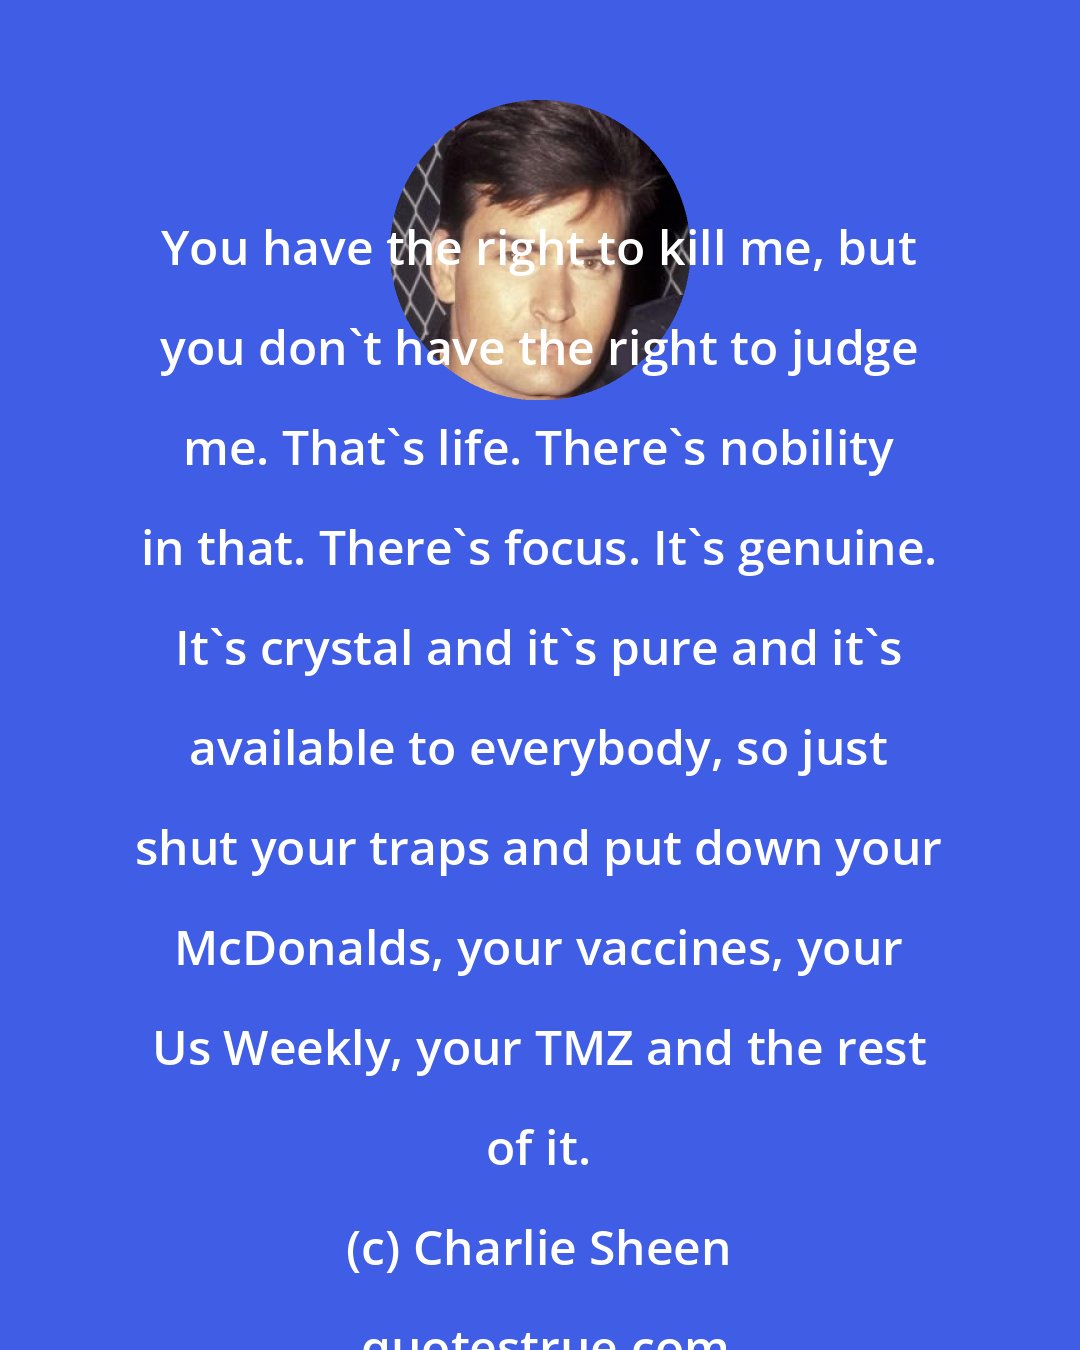 Charlie Sheen: You have the right to kill me, but you don't have the right to judge me. That's life. There's nobility in that. There's focus. It's genuine. It's crystal and it's pure and it's available to everybody, so just shut your traps and put down your McDonalds, your vaccines, your Us Weekly, your TMZ and the rest of it.